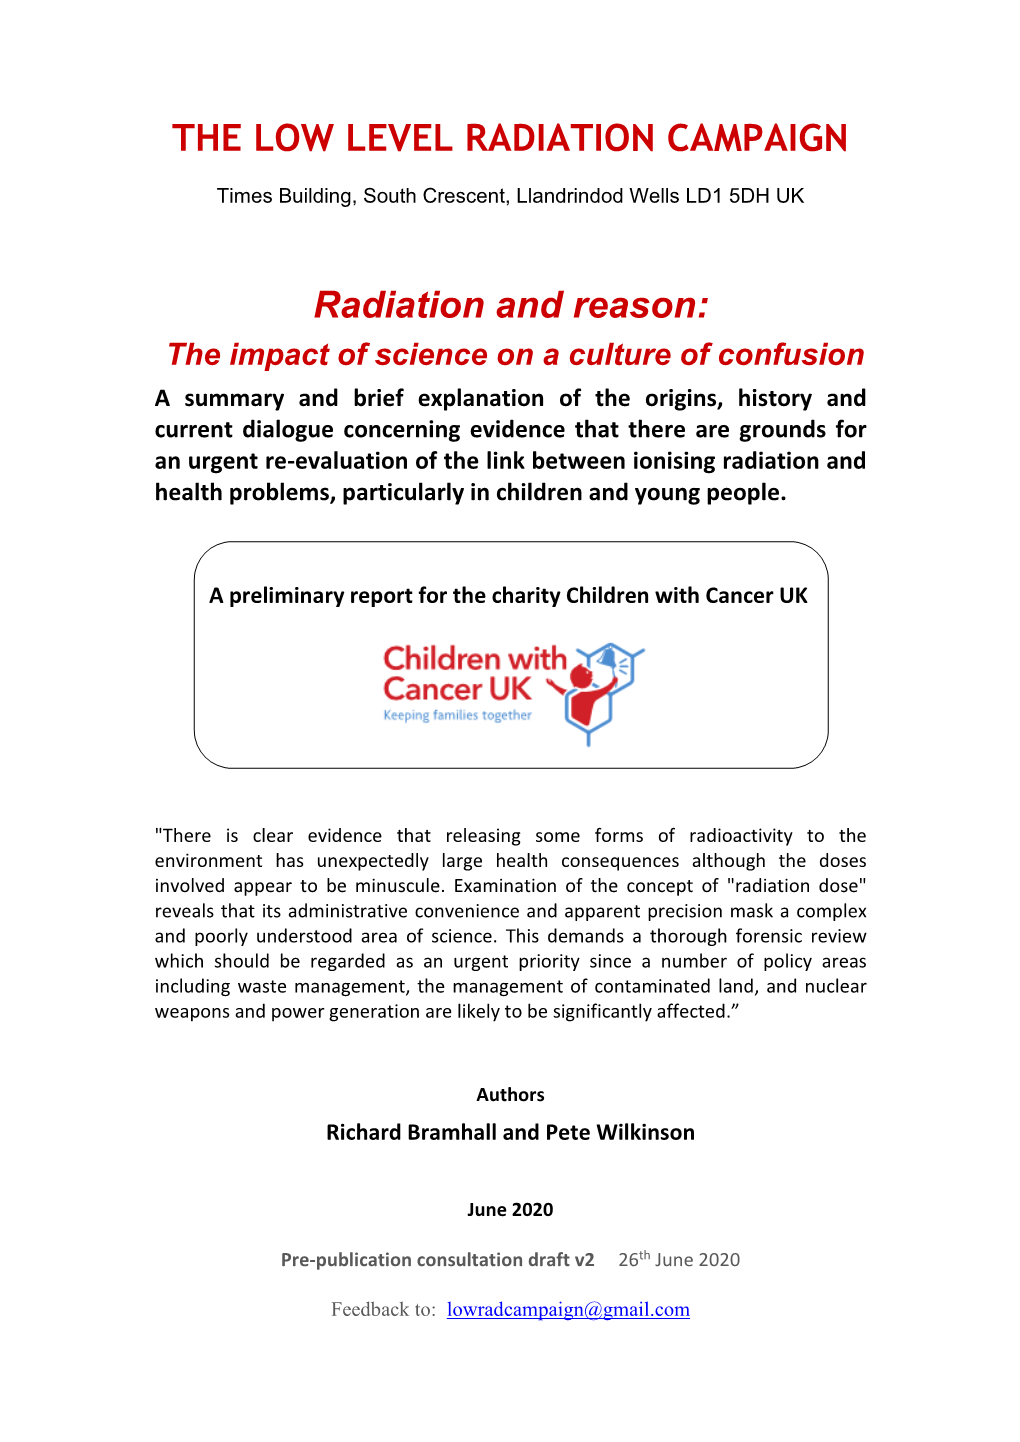 Preliminary Report for the Charity Children with Cancer UK